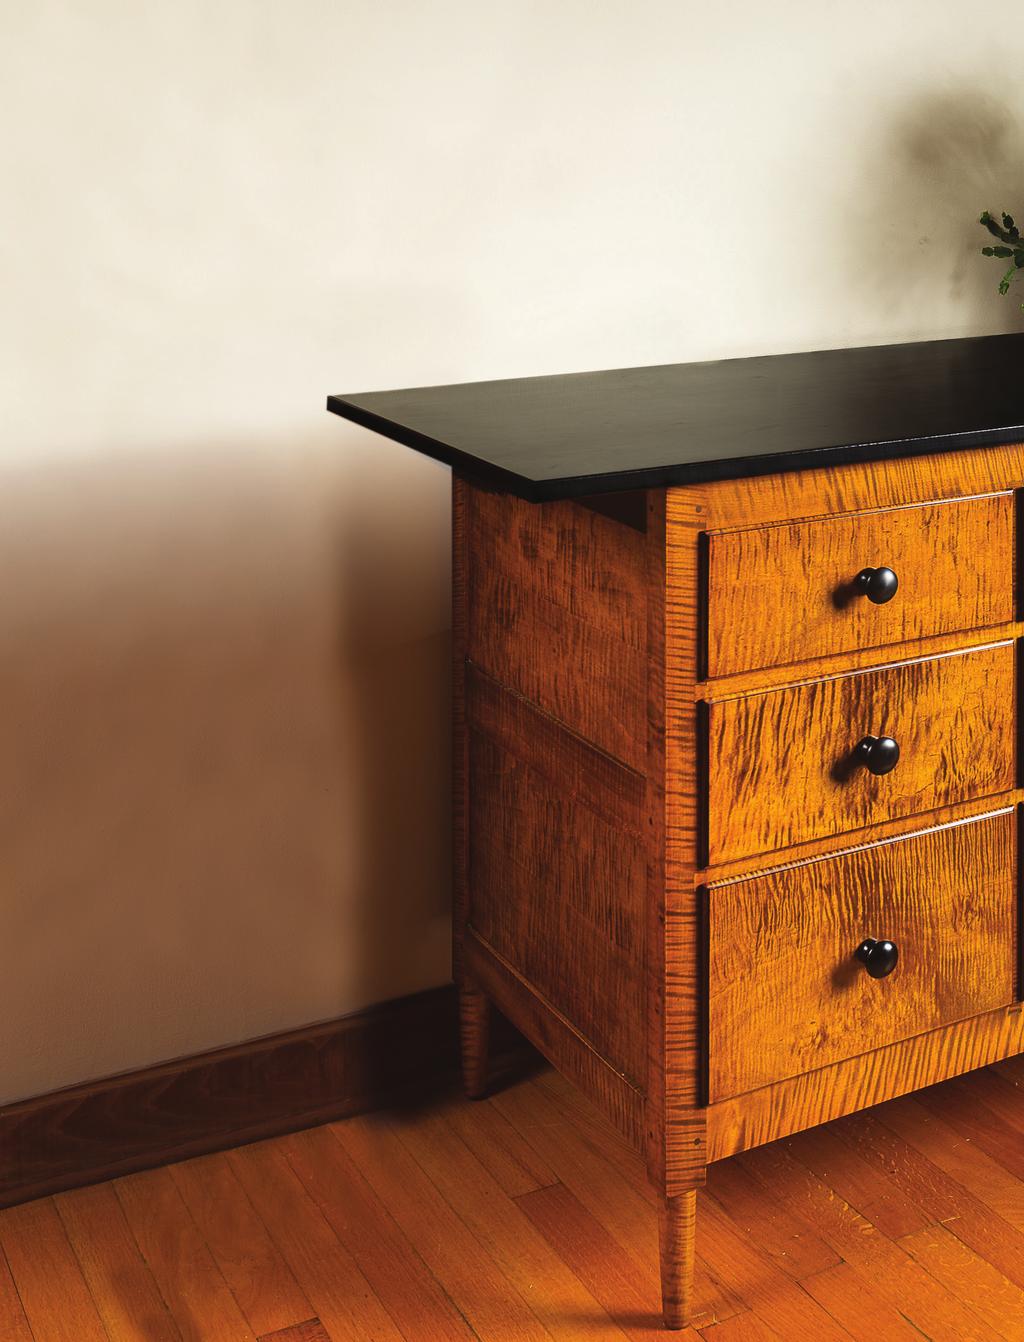 Build a Classic SHAKER COUNTER This shallow chest of drawers is a catalog of traditional joinery details.